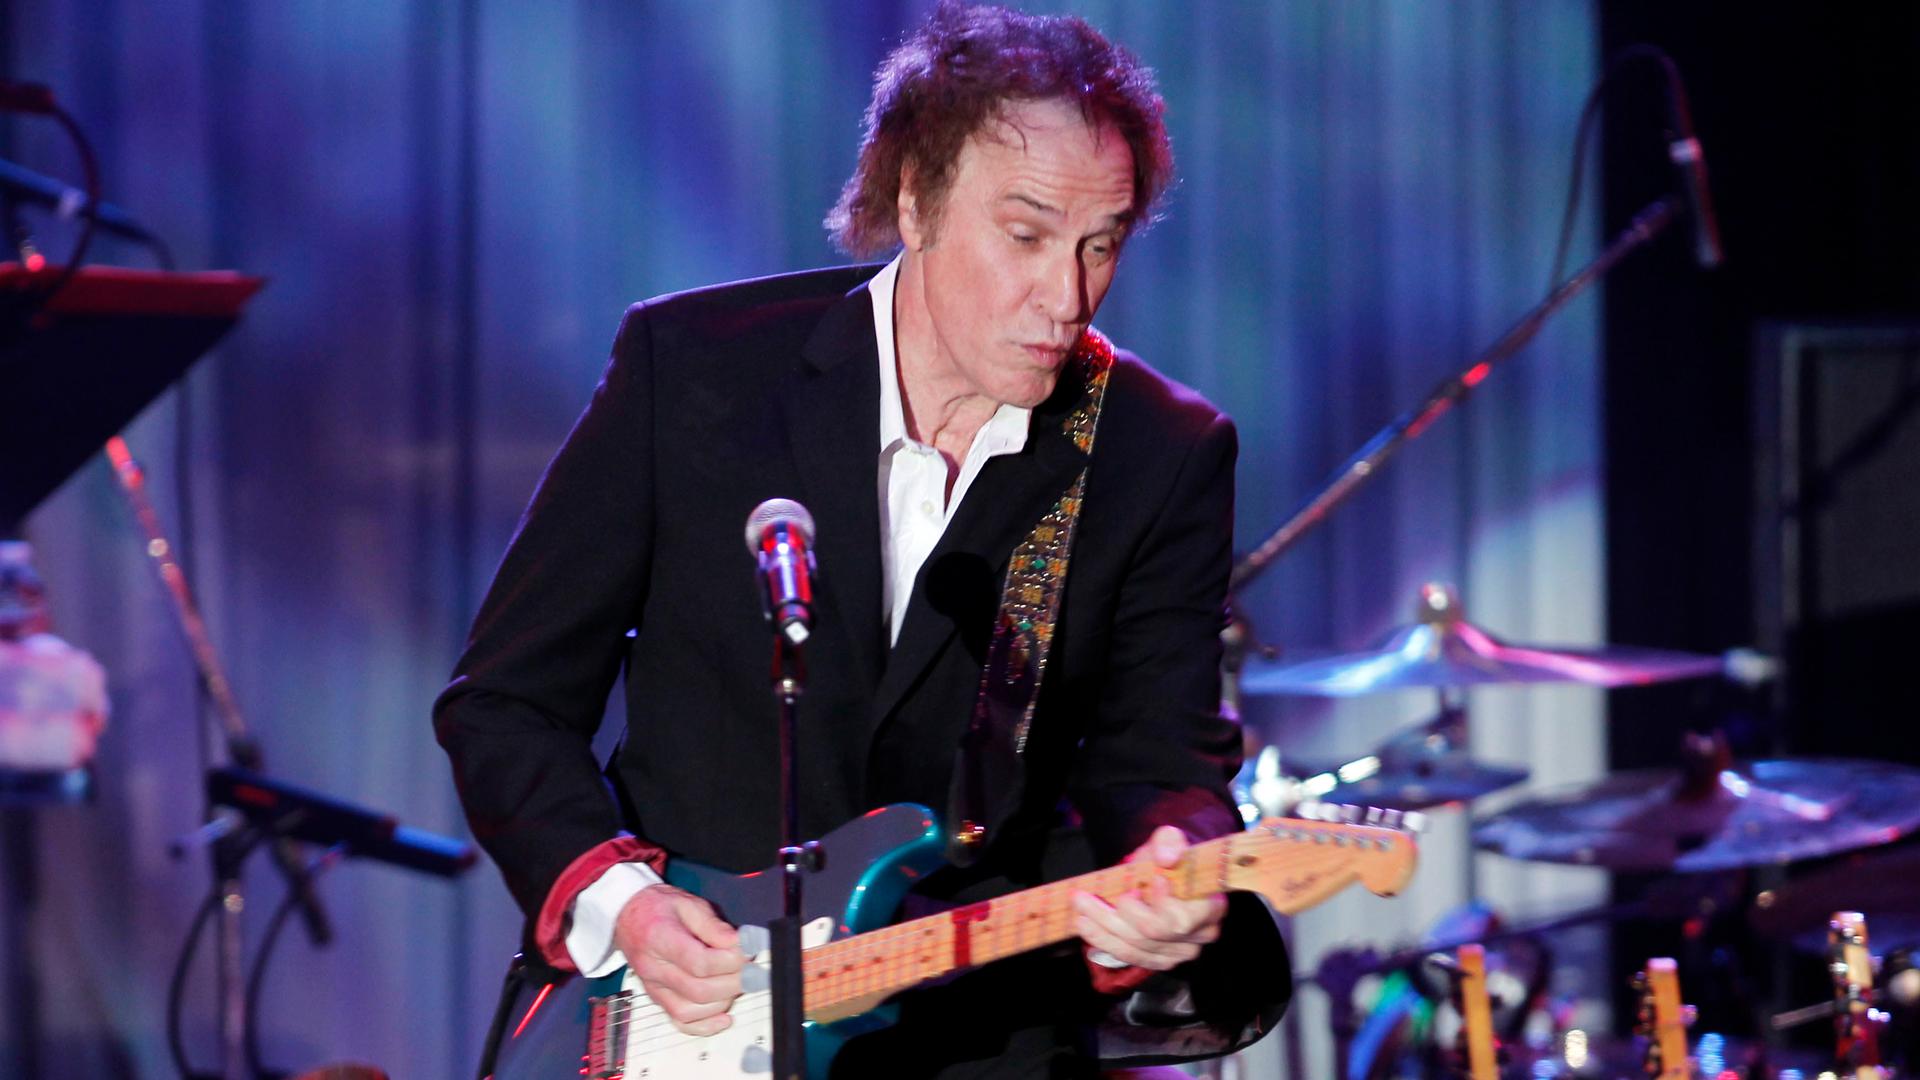 Singer Ray Davies of The Kinks performs during the 2012 Pre-Grammy Gala & Salute to Industry Icons in 2012.